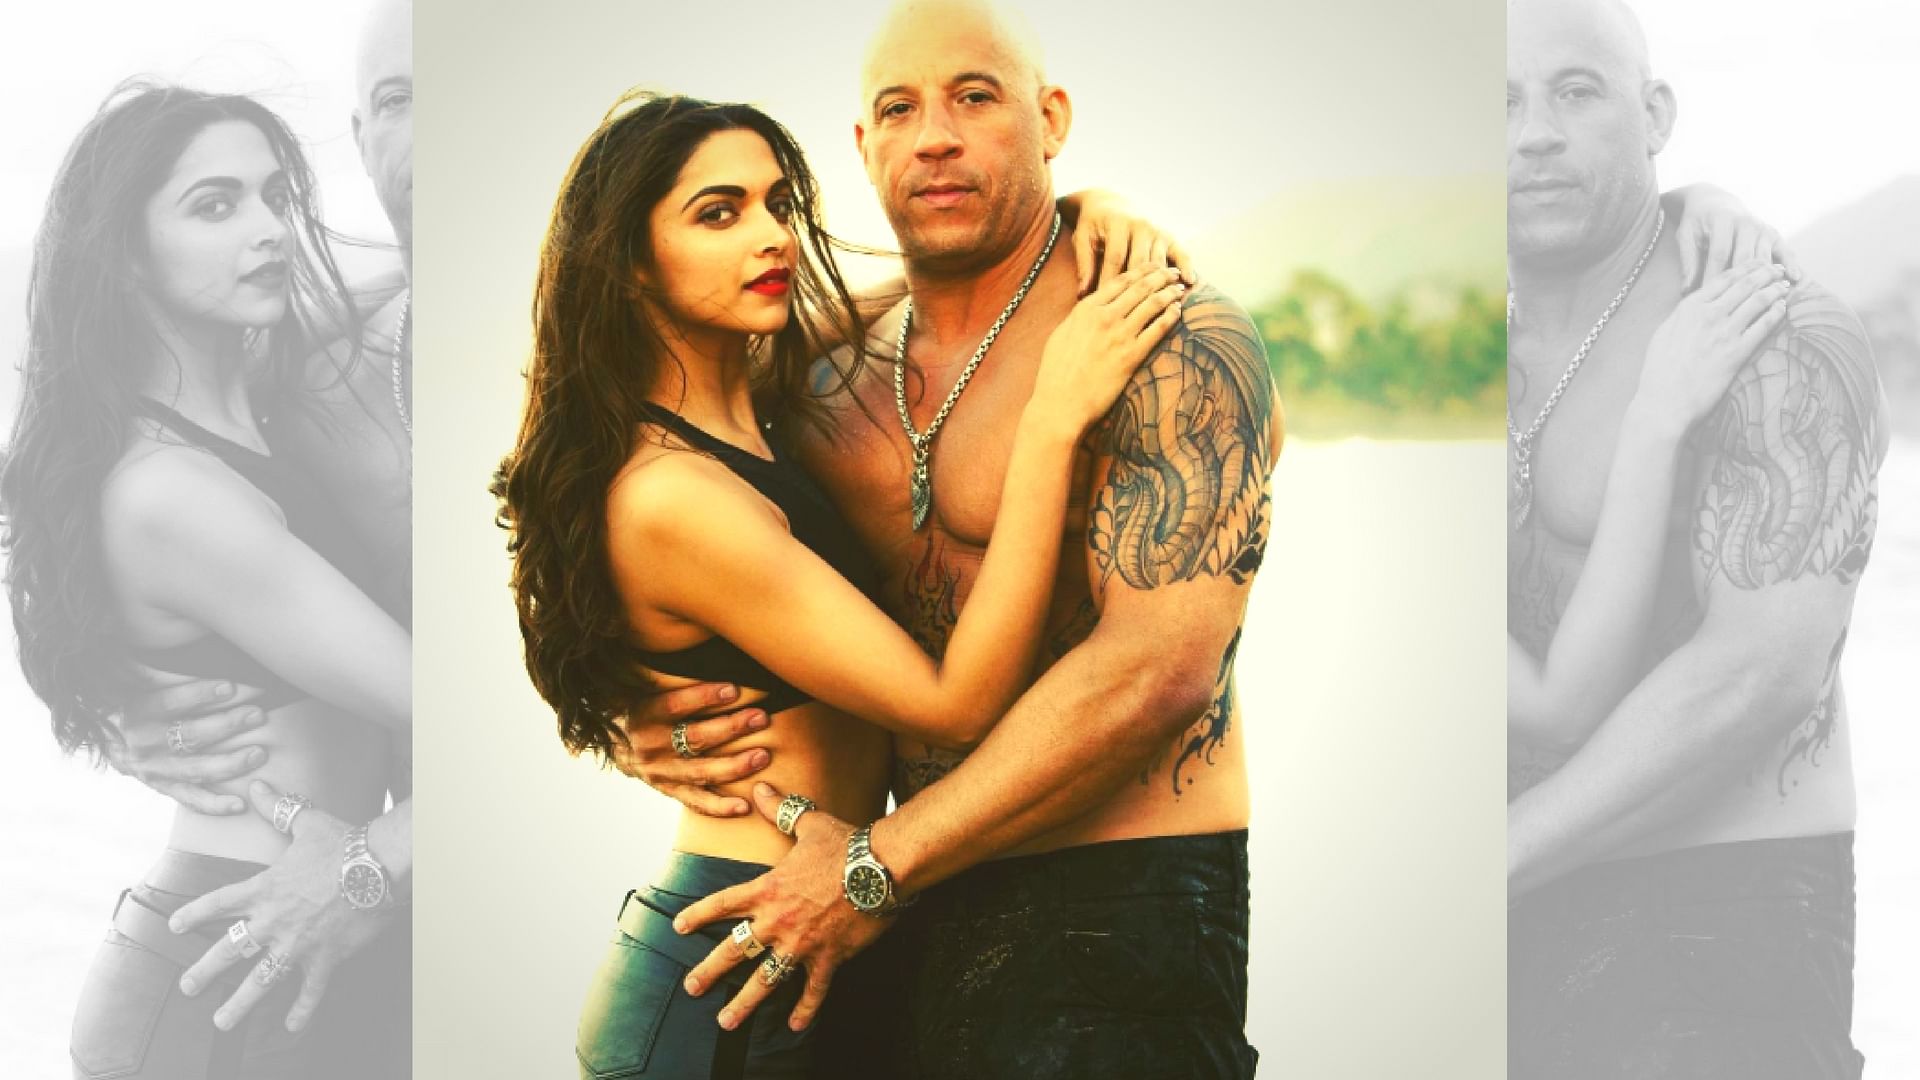 Rani Mukharji Xxx Photo - Deepika Auditioned For 'Furious 7' and Ended Up Doing 'xXx'